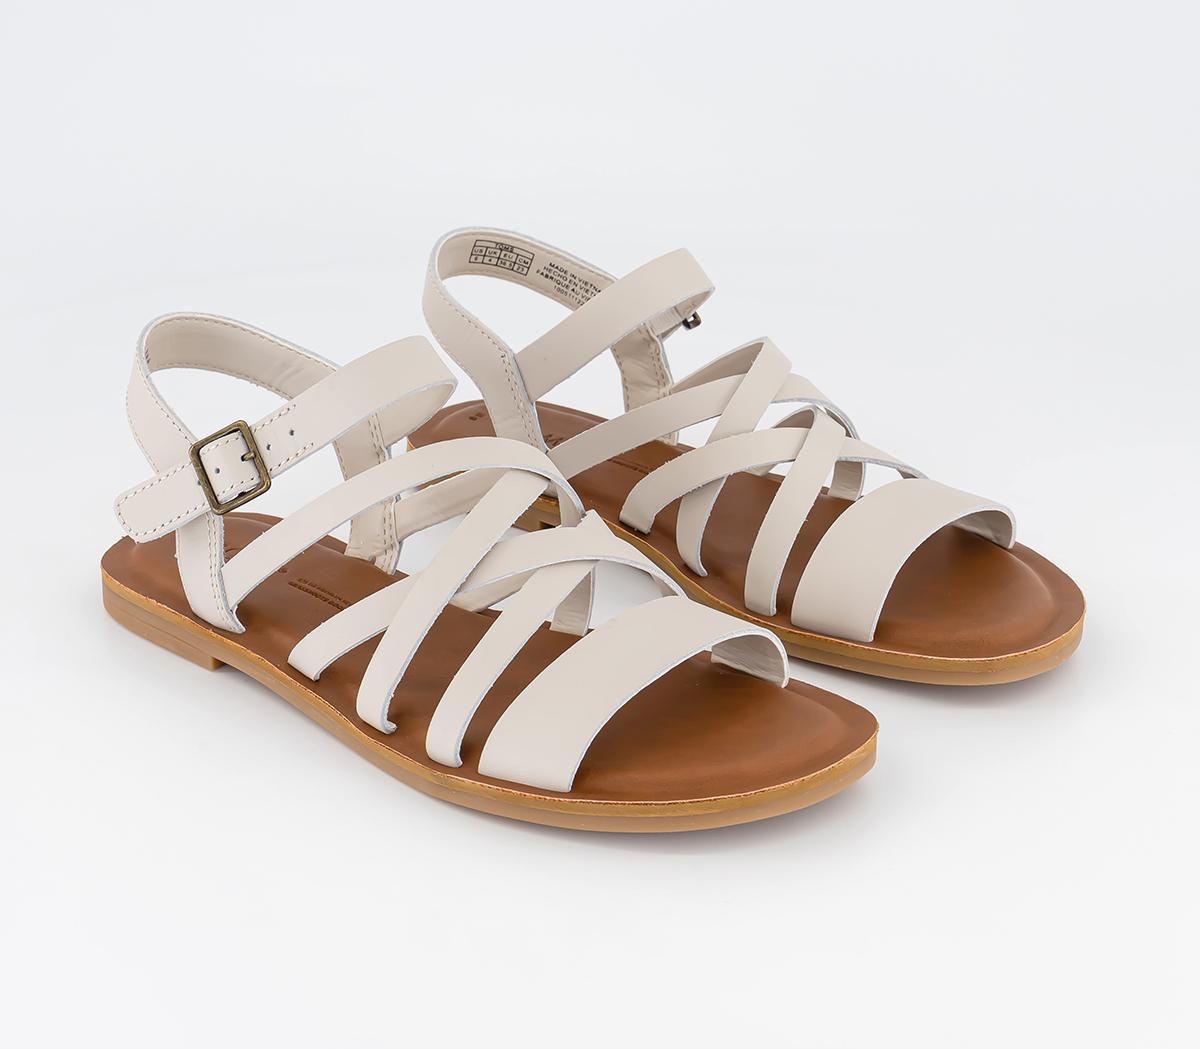 TOMS Sephina Sandals White Putty Leather - Women’s Sandals